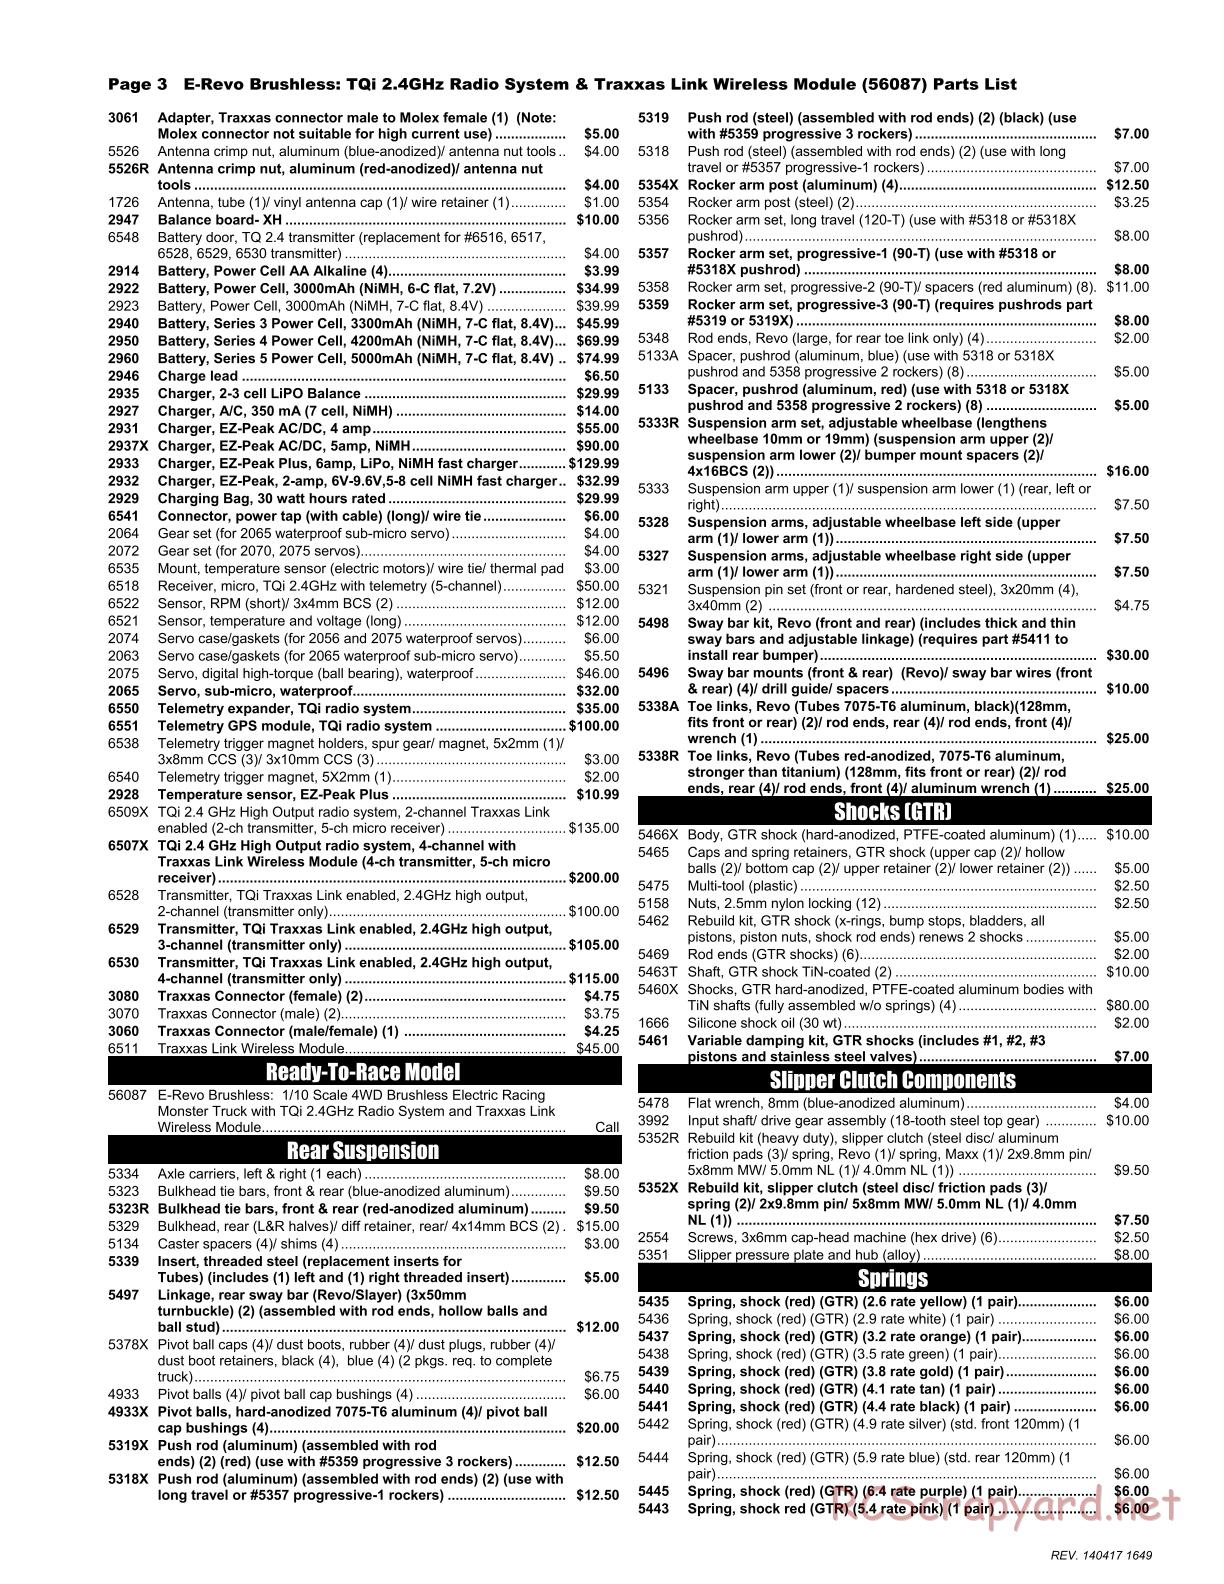 Traxxas - E-Revo Brushless (2014) - Parts List - Page 3